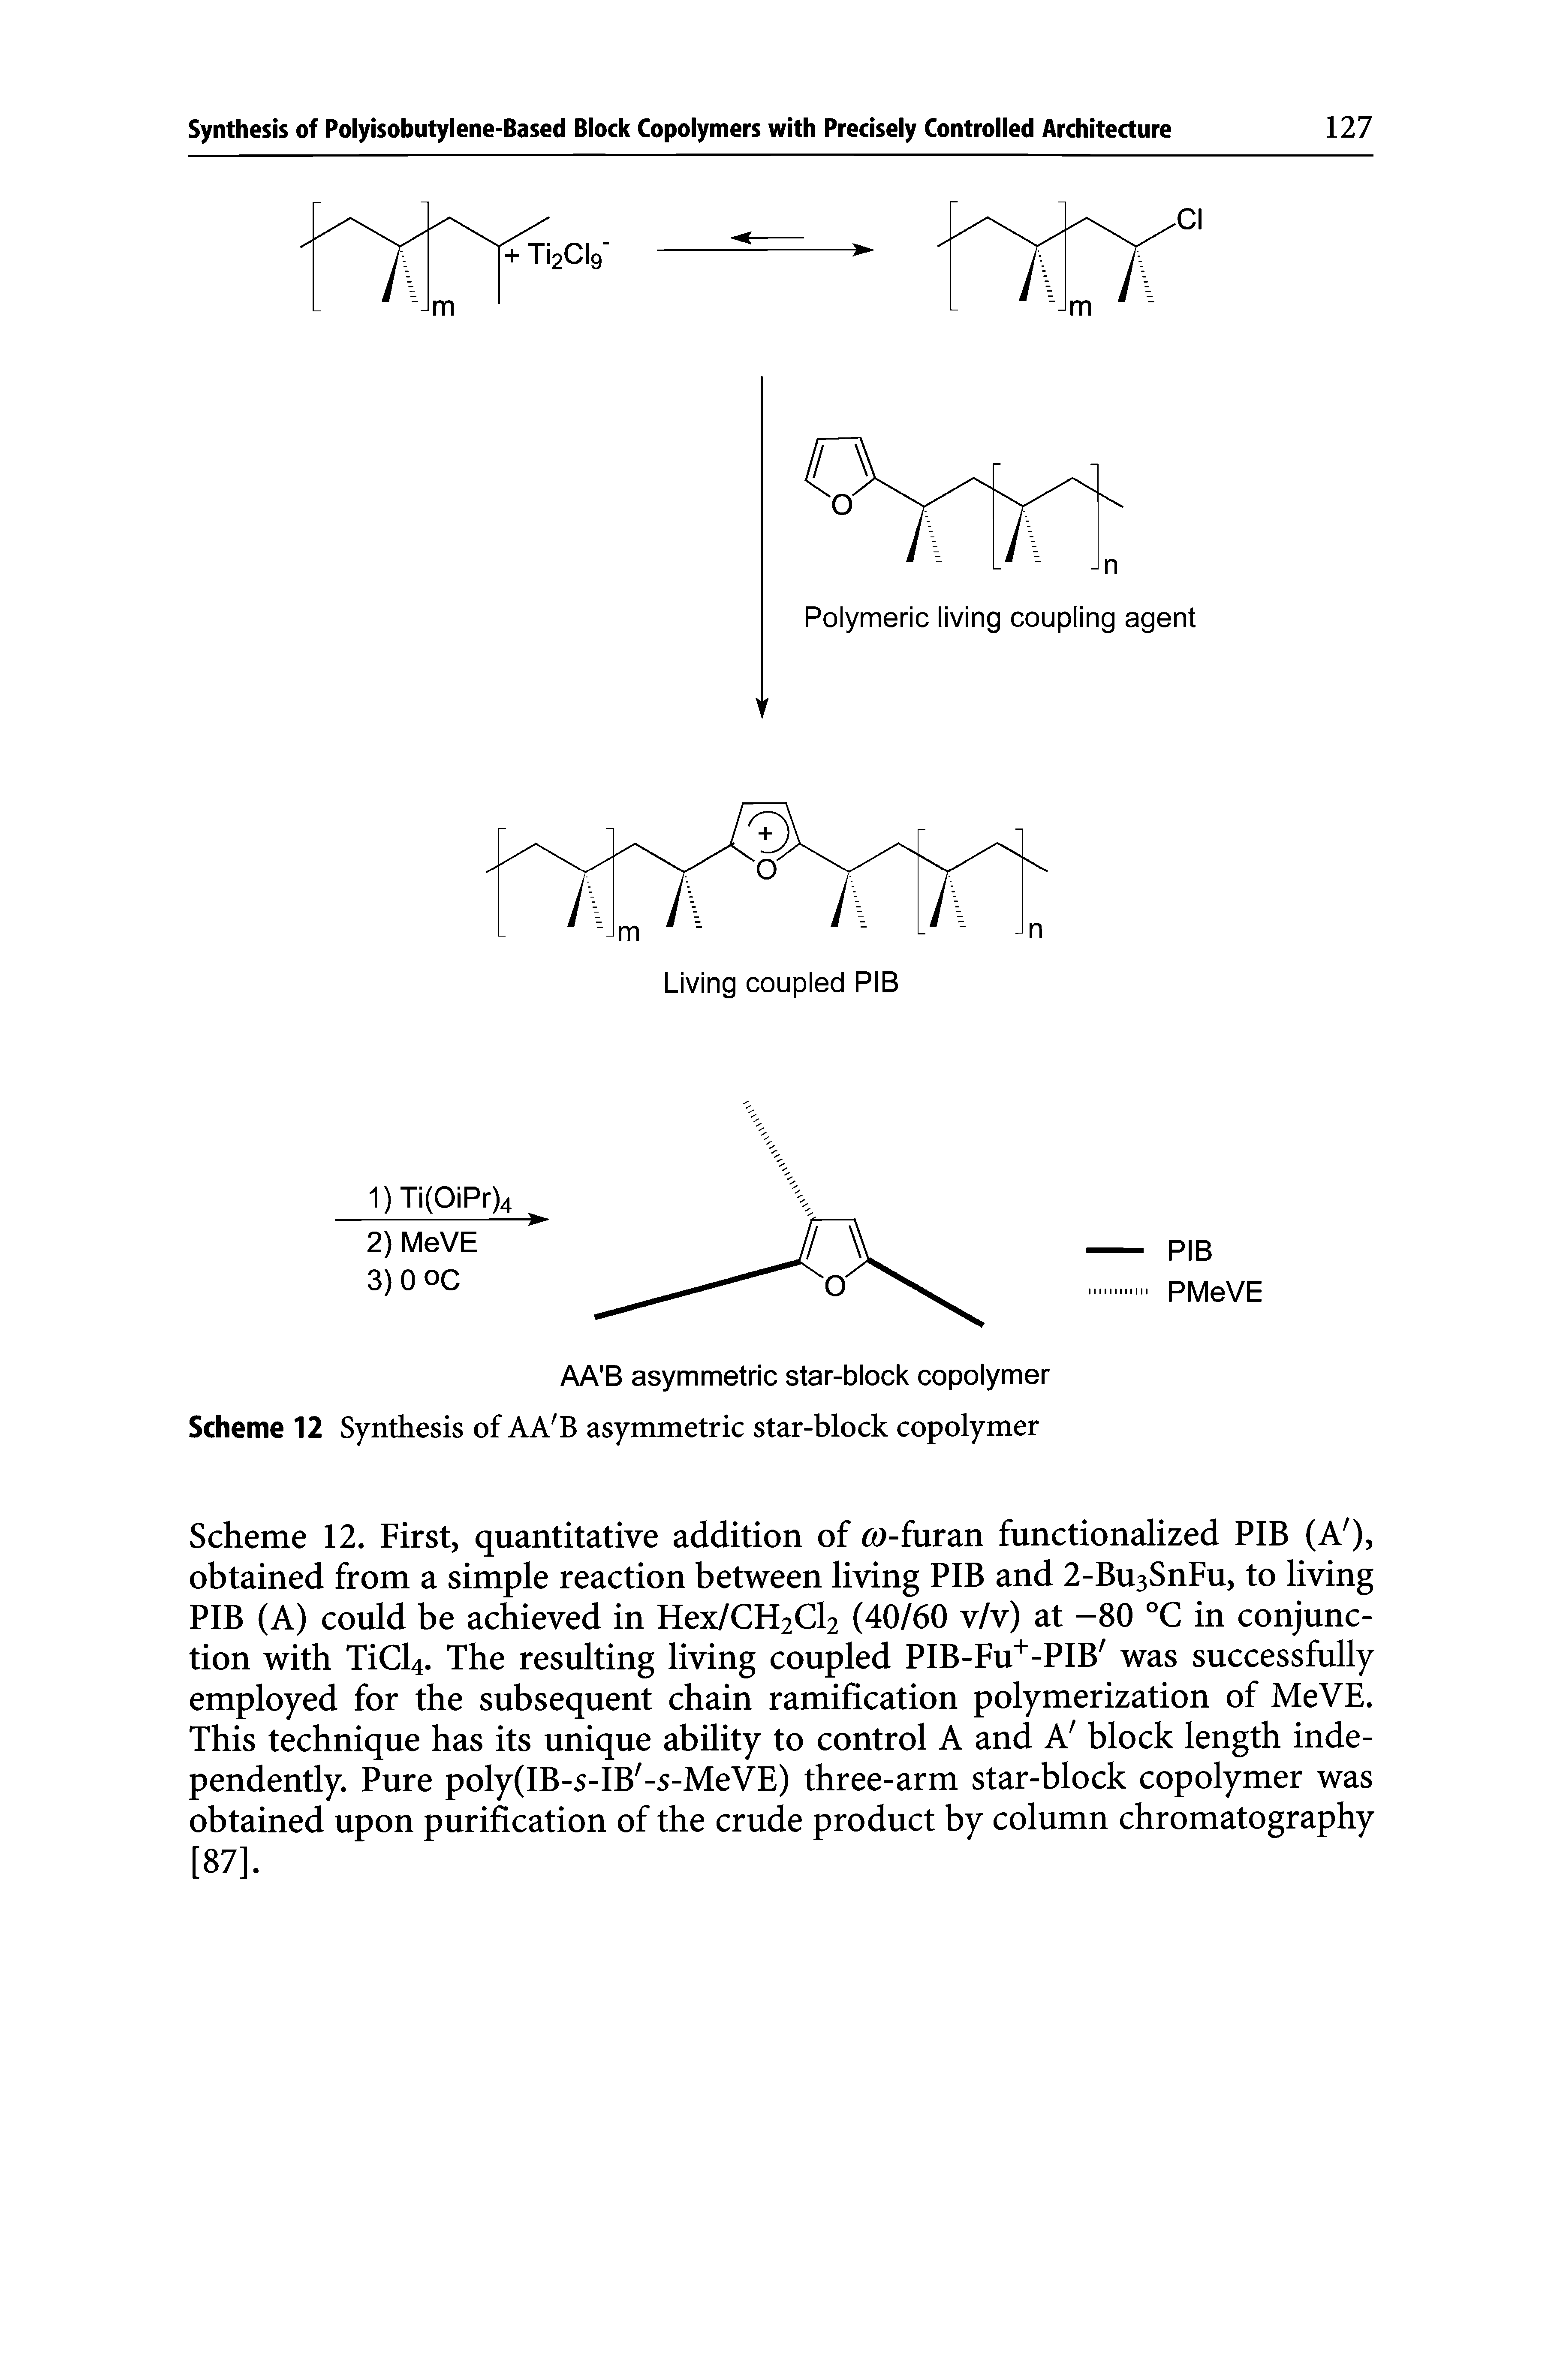 Scheme 12. First, quantitative addition of to-furan functionalized PIB (A ), obtained from a simple reaction between living PIB and 2-BusSnFu, to living PIB (A) could be achieved in Hex/CH2Cl2 (40/60 v/v) at -80 °C in conjunction with TiCl4. The resulting living coupled PIB-Fu+-PIB was successfully employed for the subsequent chain ramification polymerization of MeVE. This technique has its unique ability to control A and A block length independently. Pure poly(IB-s-IB -s-MeVE) three-arm star-block copolymer was obtained upon purification of the crude product by column chromatography [87].